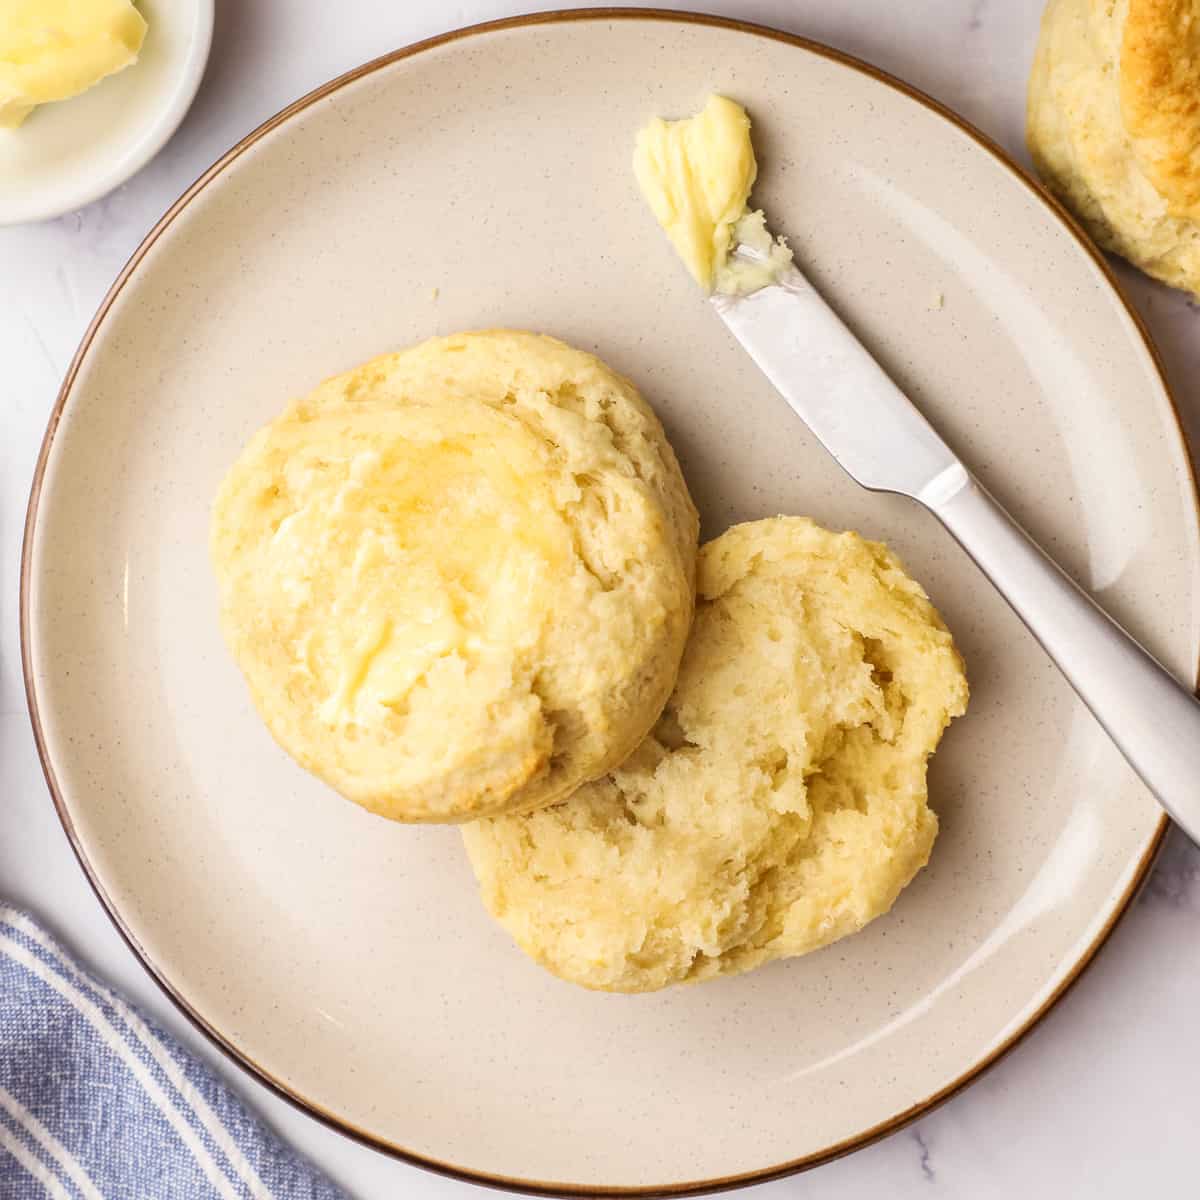 a homemade biscuit cut in half on a plate with butter